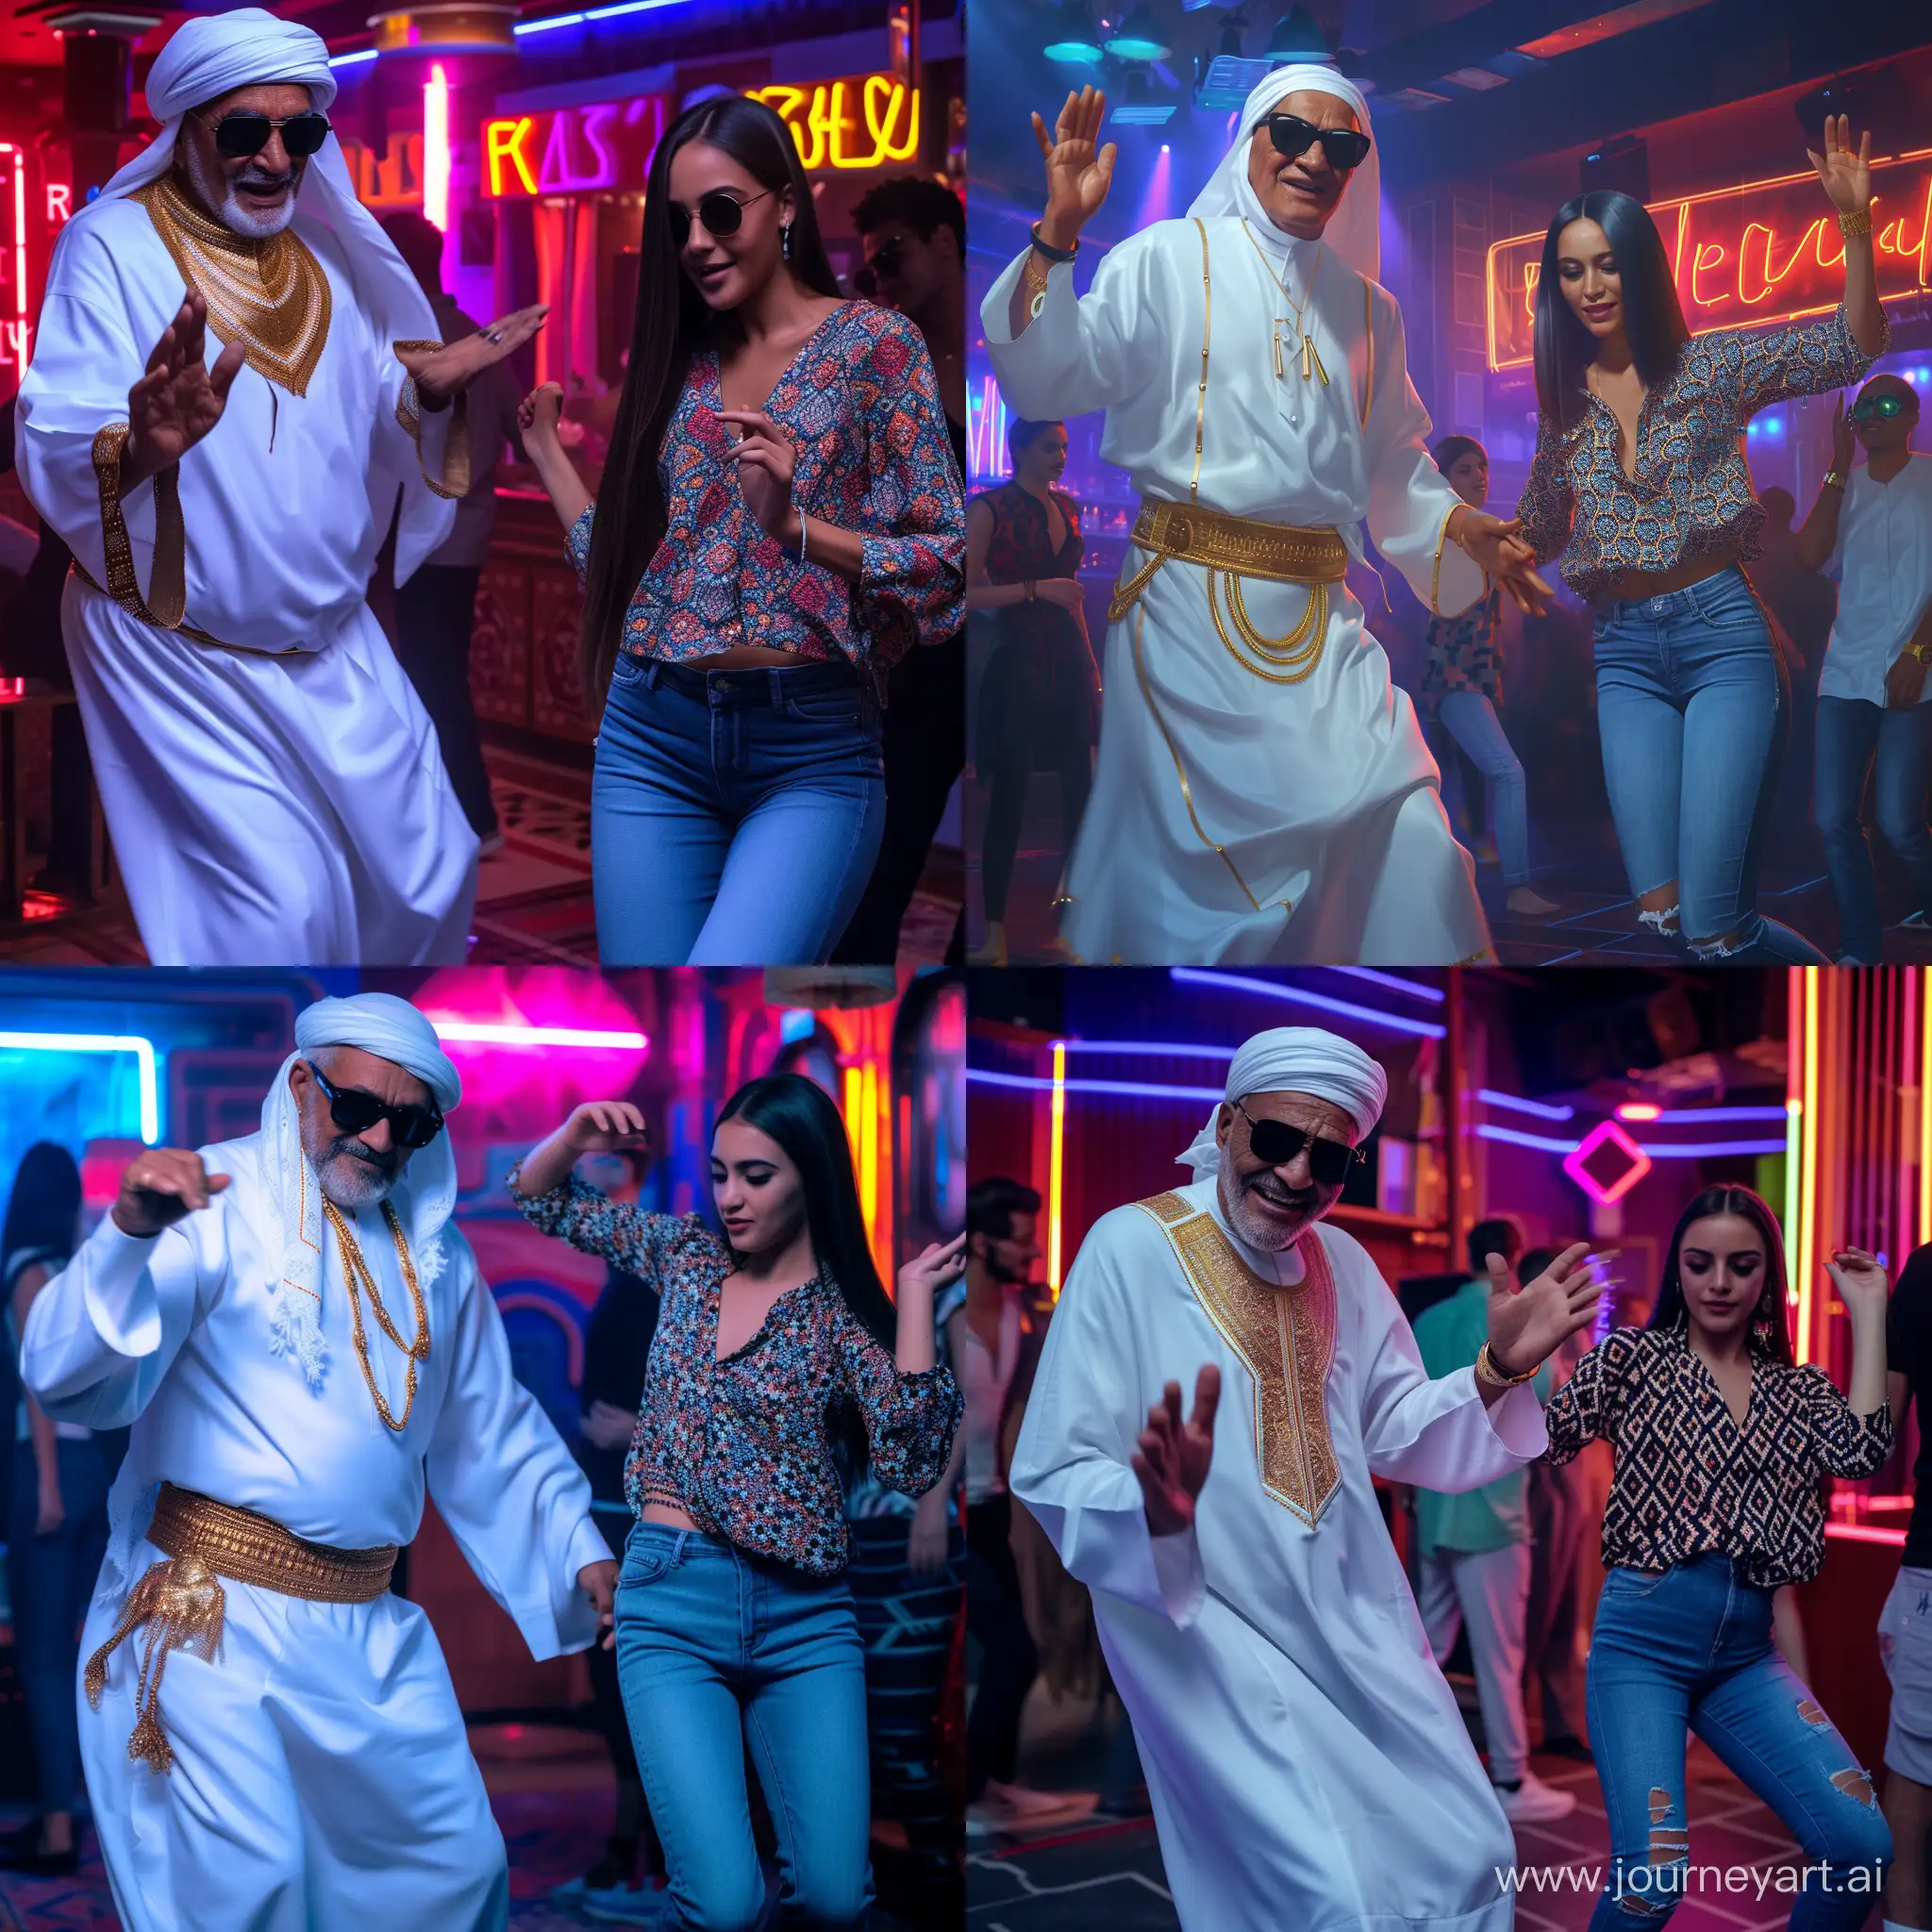 /imagine prompt: A Moroccan elder in traditional white jellabah, and gold accessories, wearing dark sunglasses, joyous in a vibrant nightclub atmosphere, a girl in a patterned blouse and jeans, straight dark hair dances freely nearby, clearly apart. Both are dancing with hands up. Background has club-goers and neon lights. Created Using: authentic traditional costume details, dim club lighting, vibrant neon colors, cultural attire detail, nightclub ambiance, clear separation of subjects, hd quality, natural look --ar 1:1 --v 6.0 --v 6 --ar 1:1 --no 17988